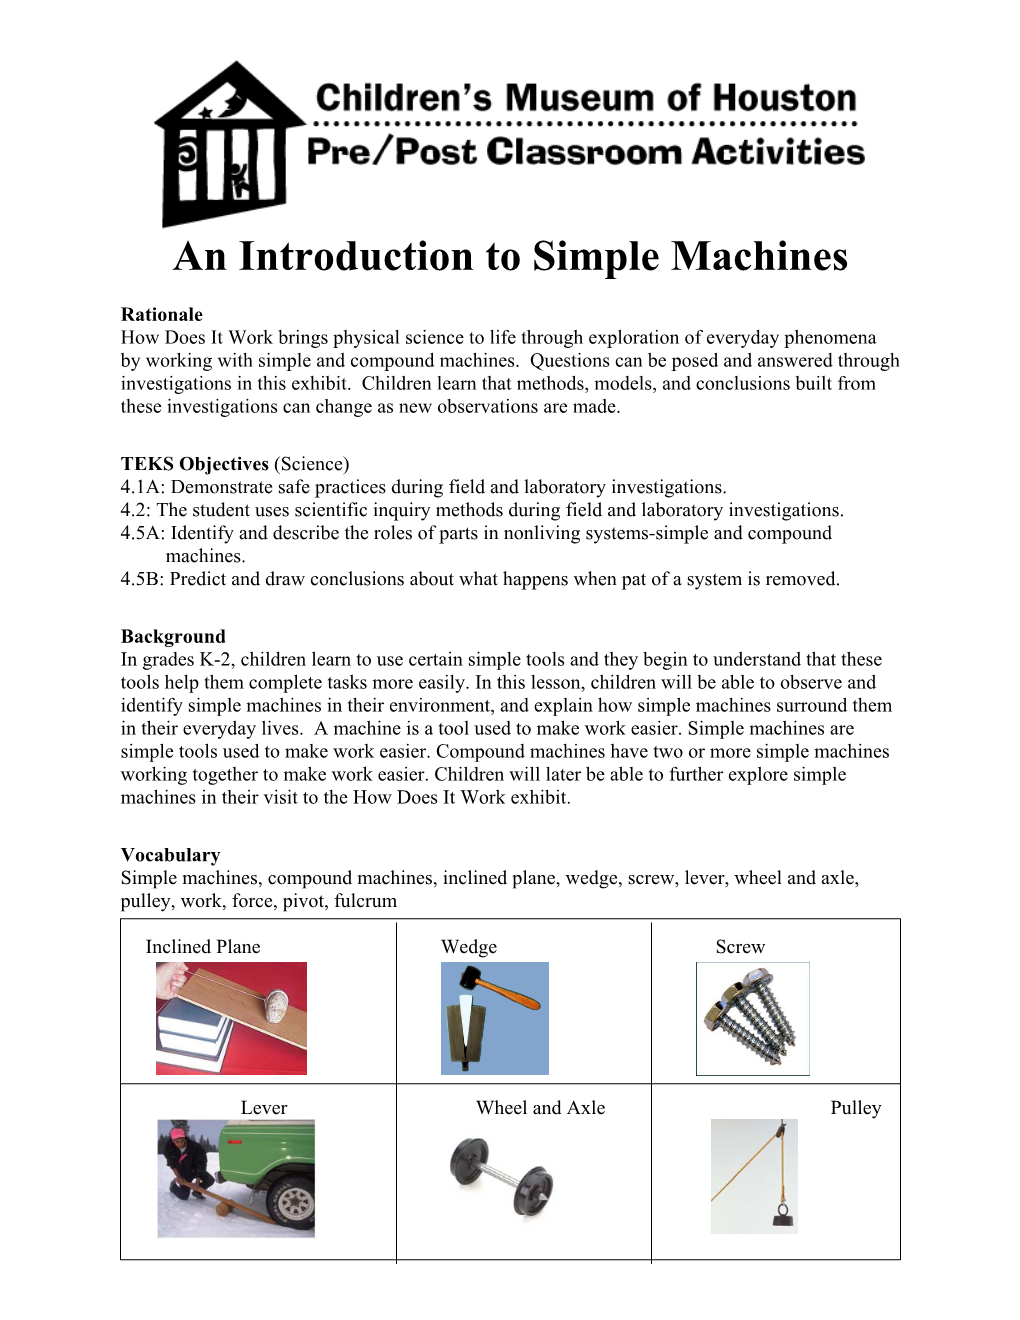 An Introduction to Simple Machines